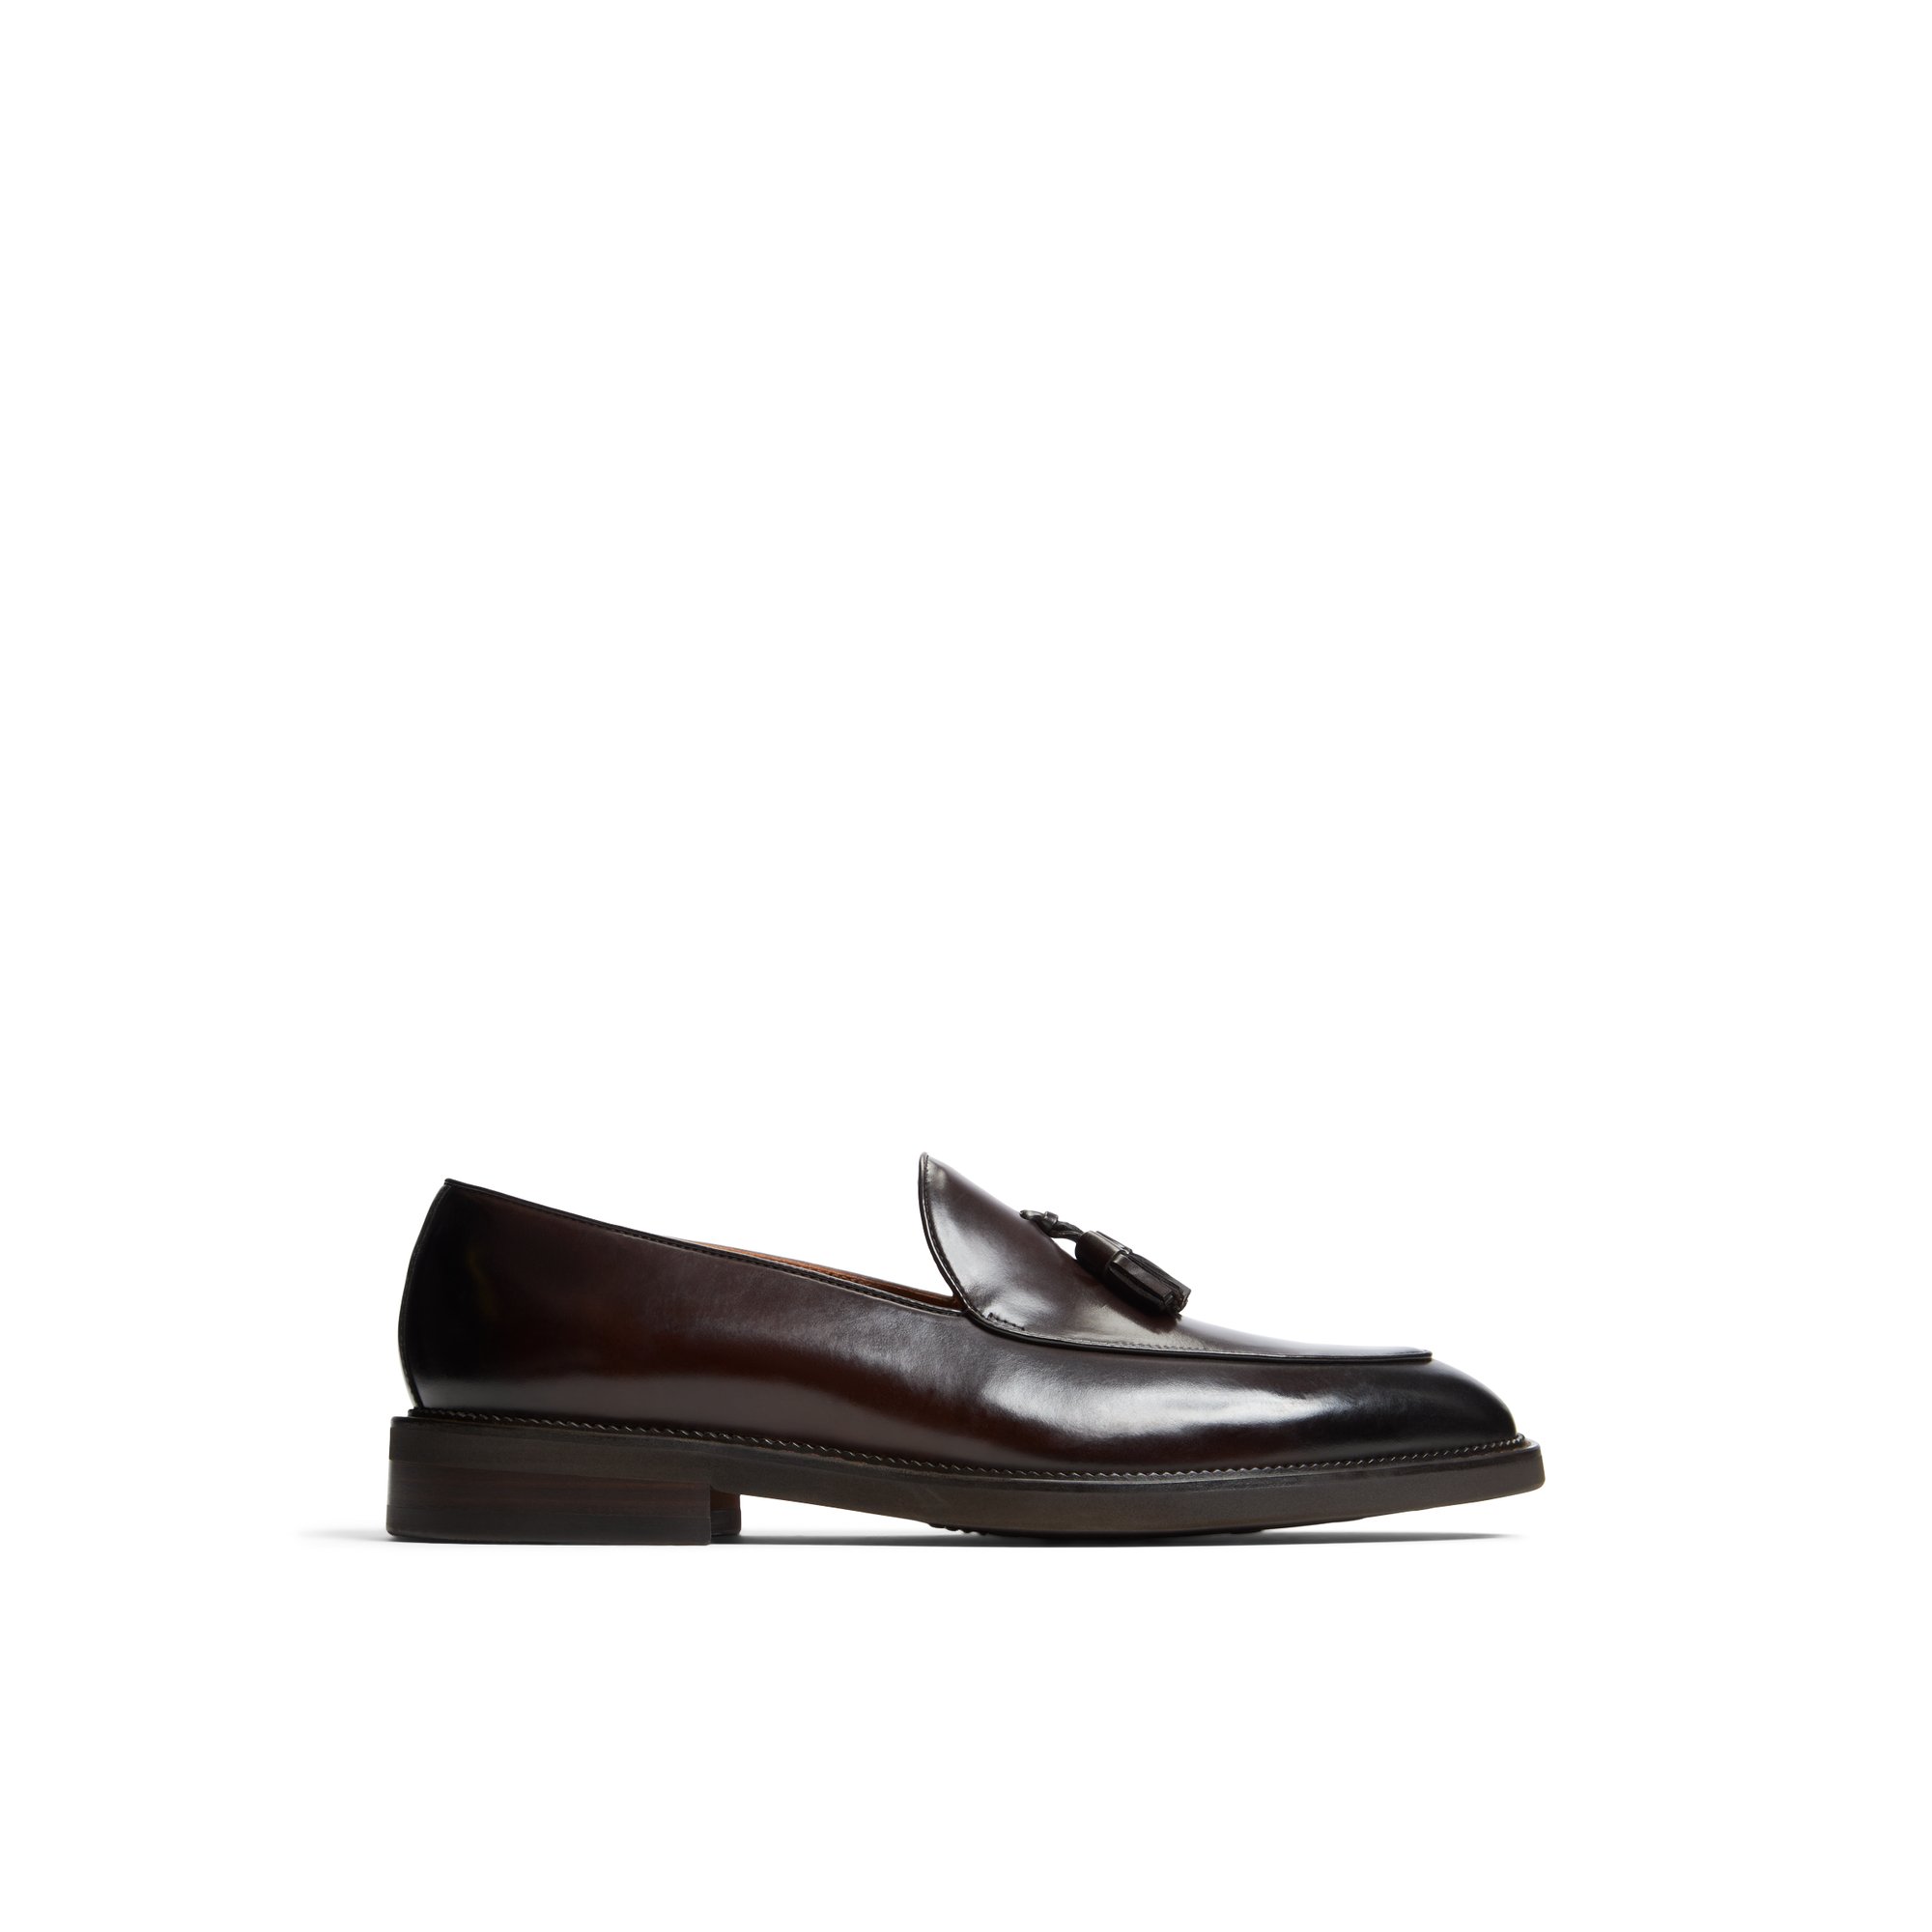 ALDO Charlo - Men's Loafers and Slip Ons - Brown